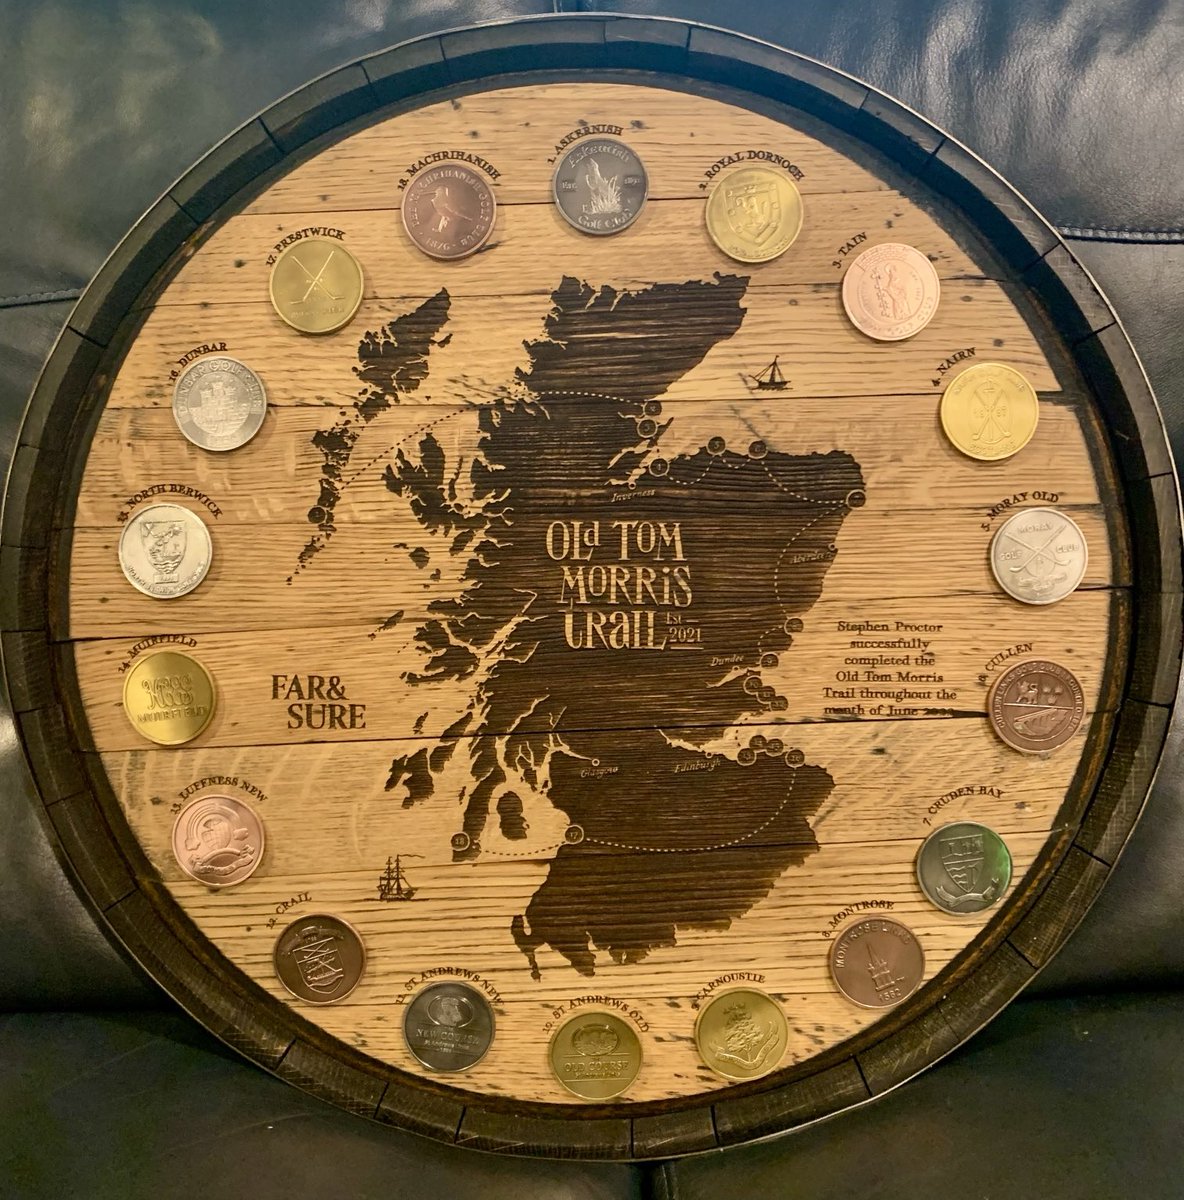 David Harris, creator of the ⁦@OTMTrail⁩ and one of my favorite people in the world, stopped by the farm to present me with my whisky cask lid and coins for having played all 18 of the courses. Can’t wait to hang this in the Writing Room! ⁦@BonnieWeeGolf⁩